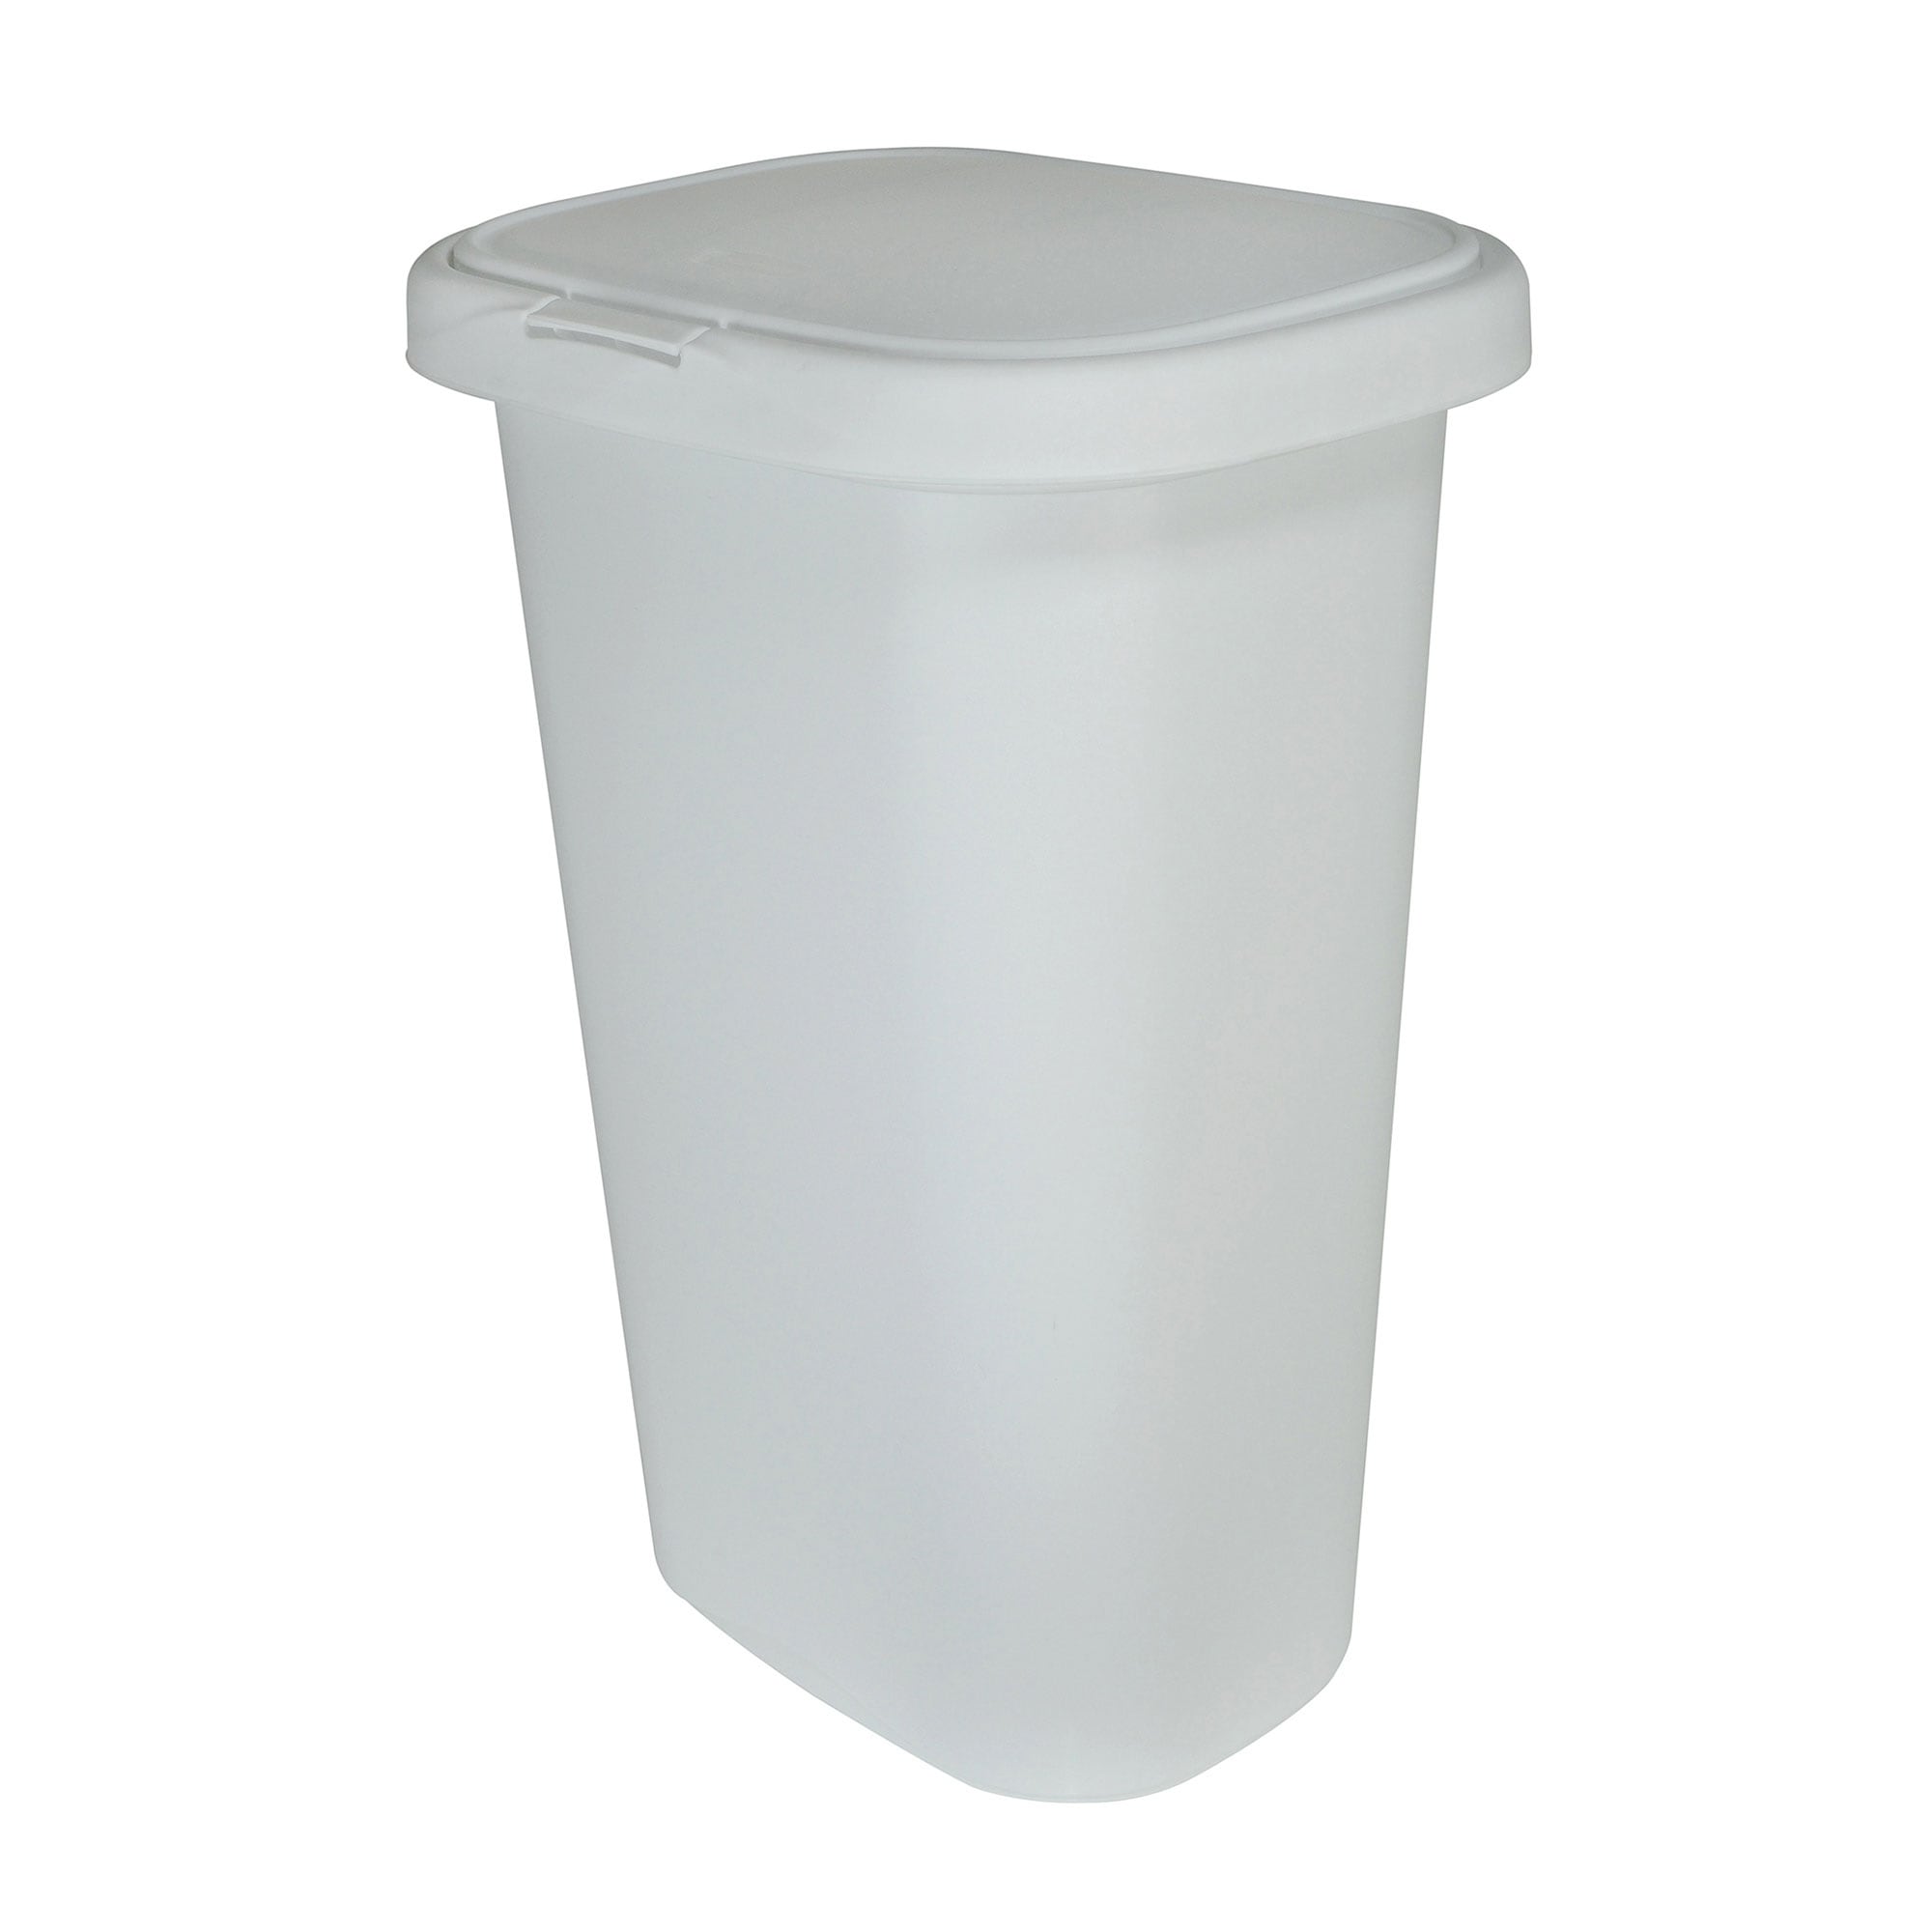 https://ak1.ostkcdn.com/images/products/is/images/direct/d5f5ce89040d5826945ca6e4f4d1d44a3627ca1e/Rubbermaid-13-Gallon-Rectangular-Spring-Top-Lid-Trash-Can-%282-Pack%29.jpg